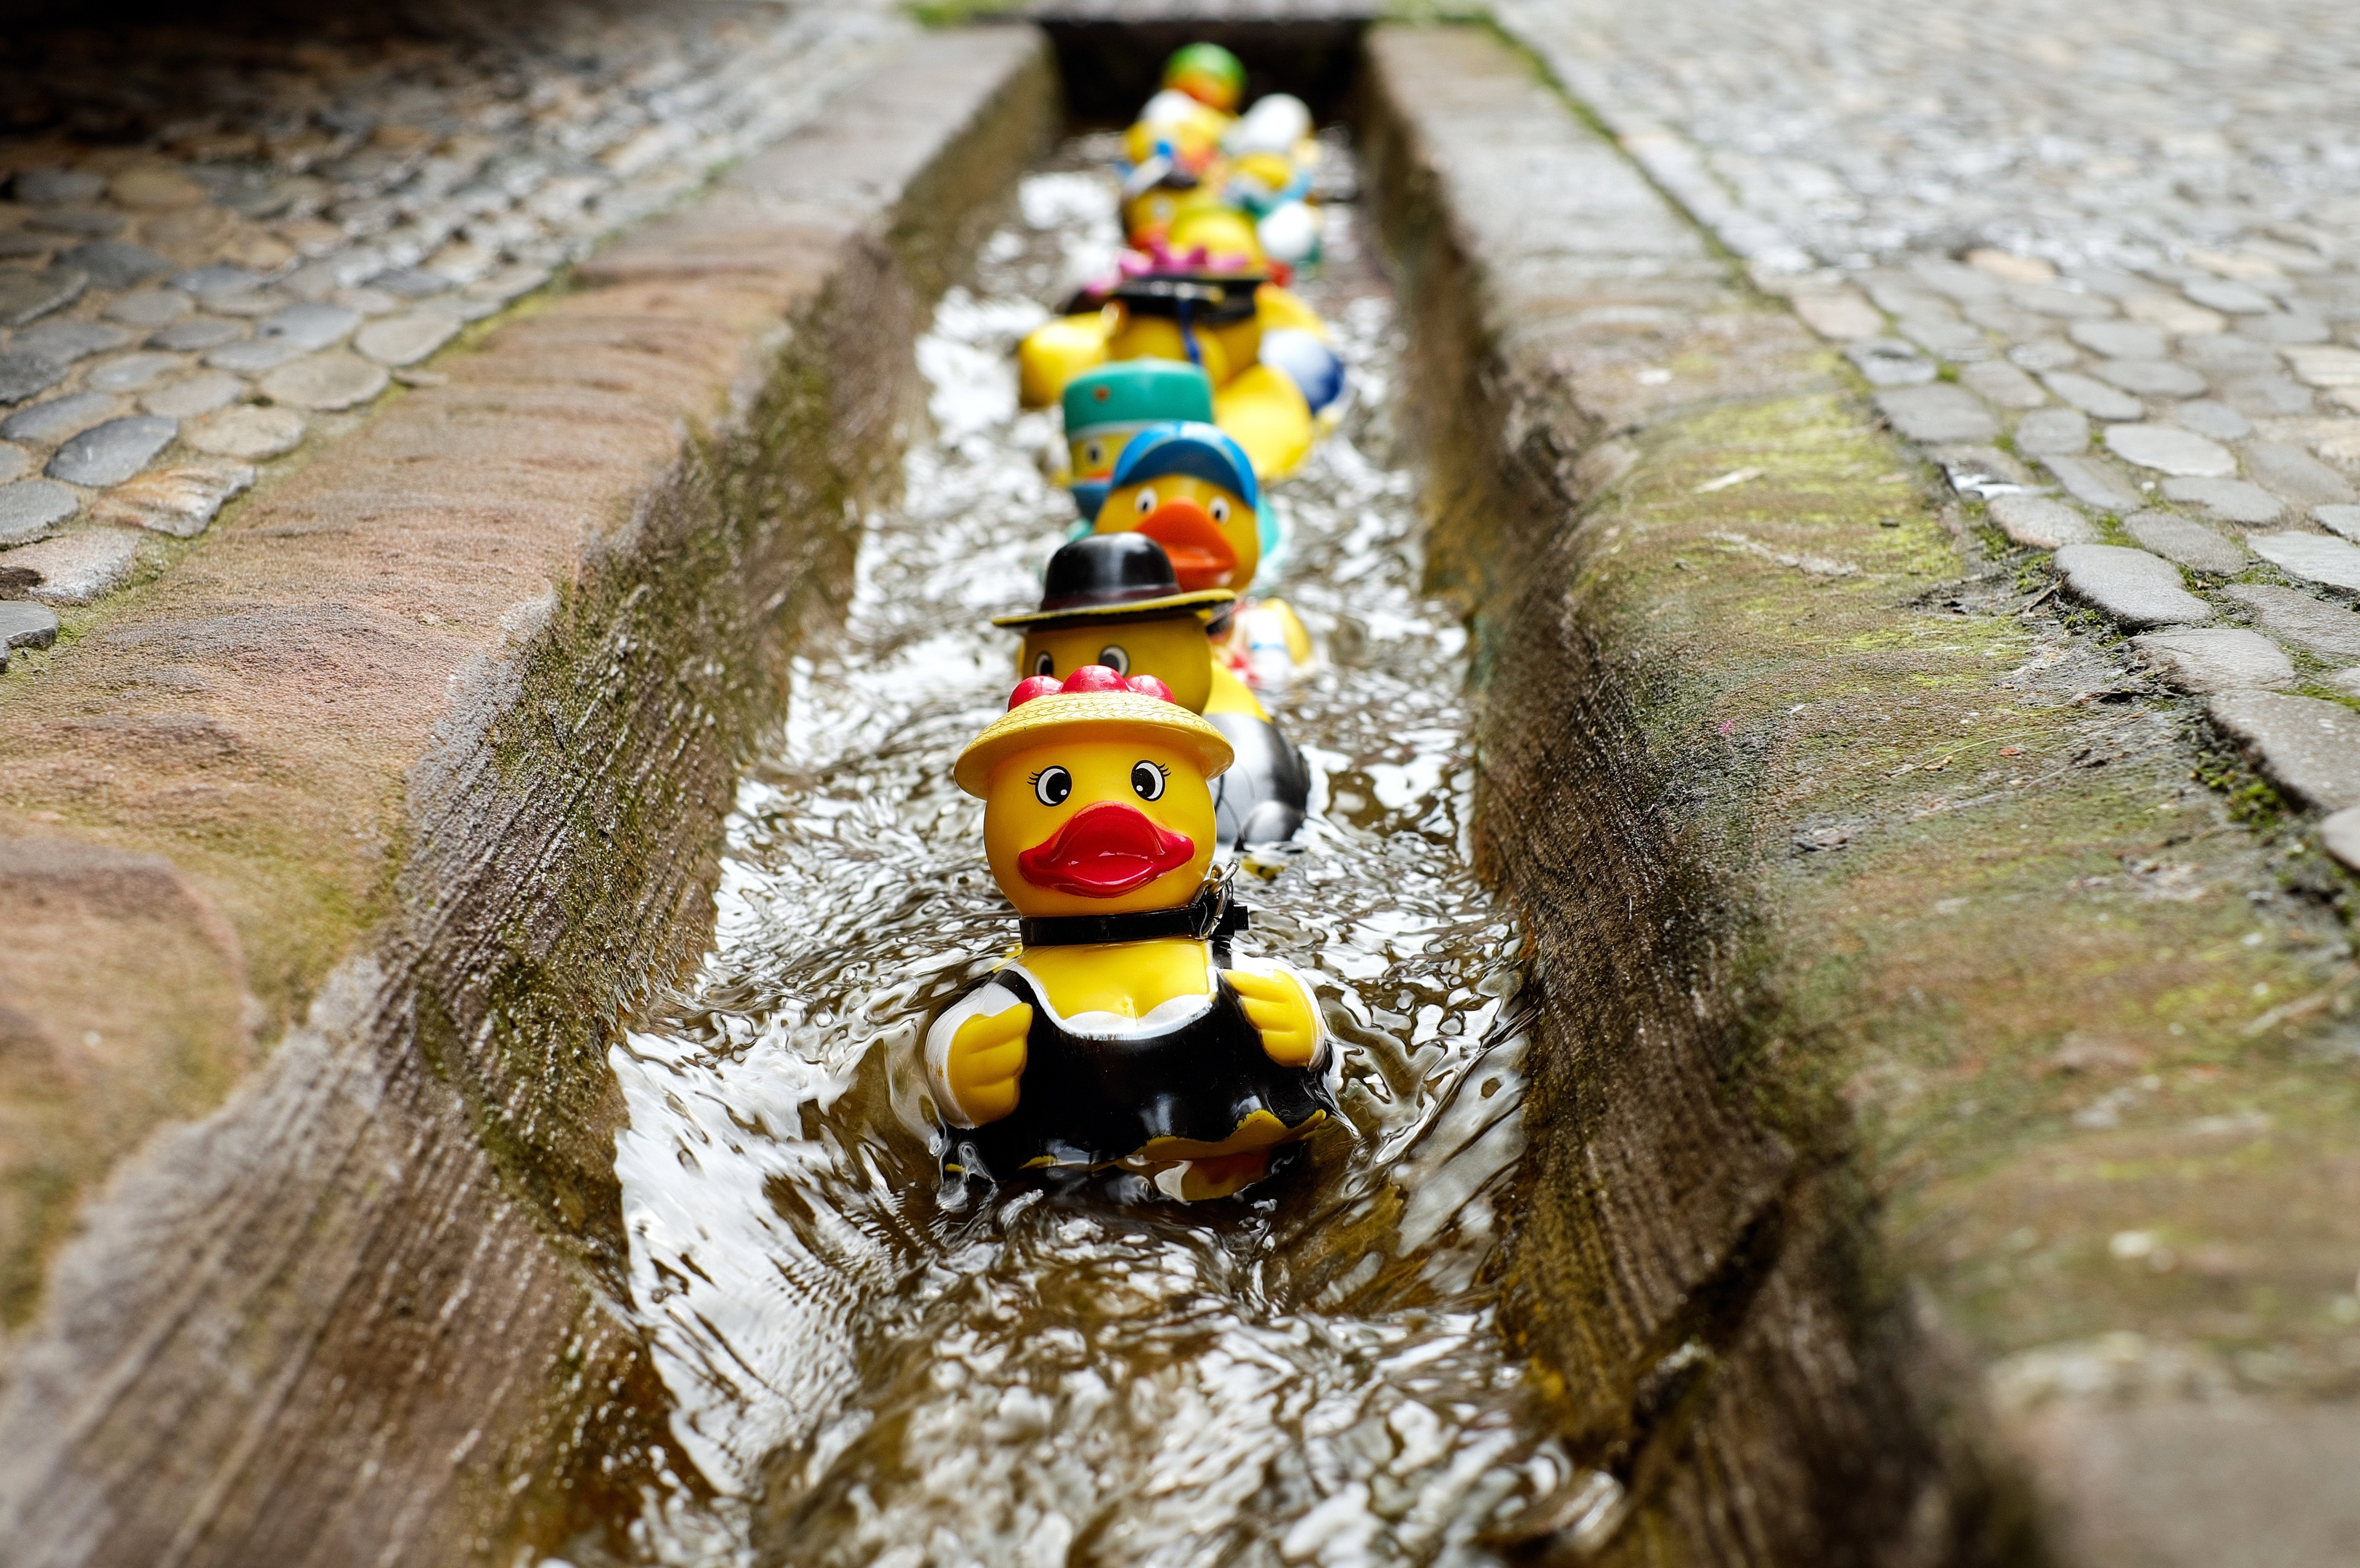 These adorable rubber ducks